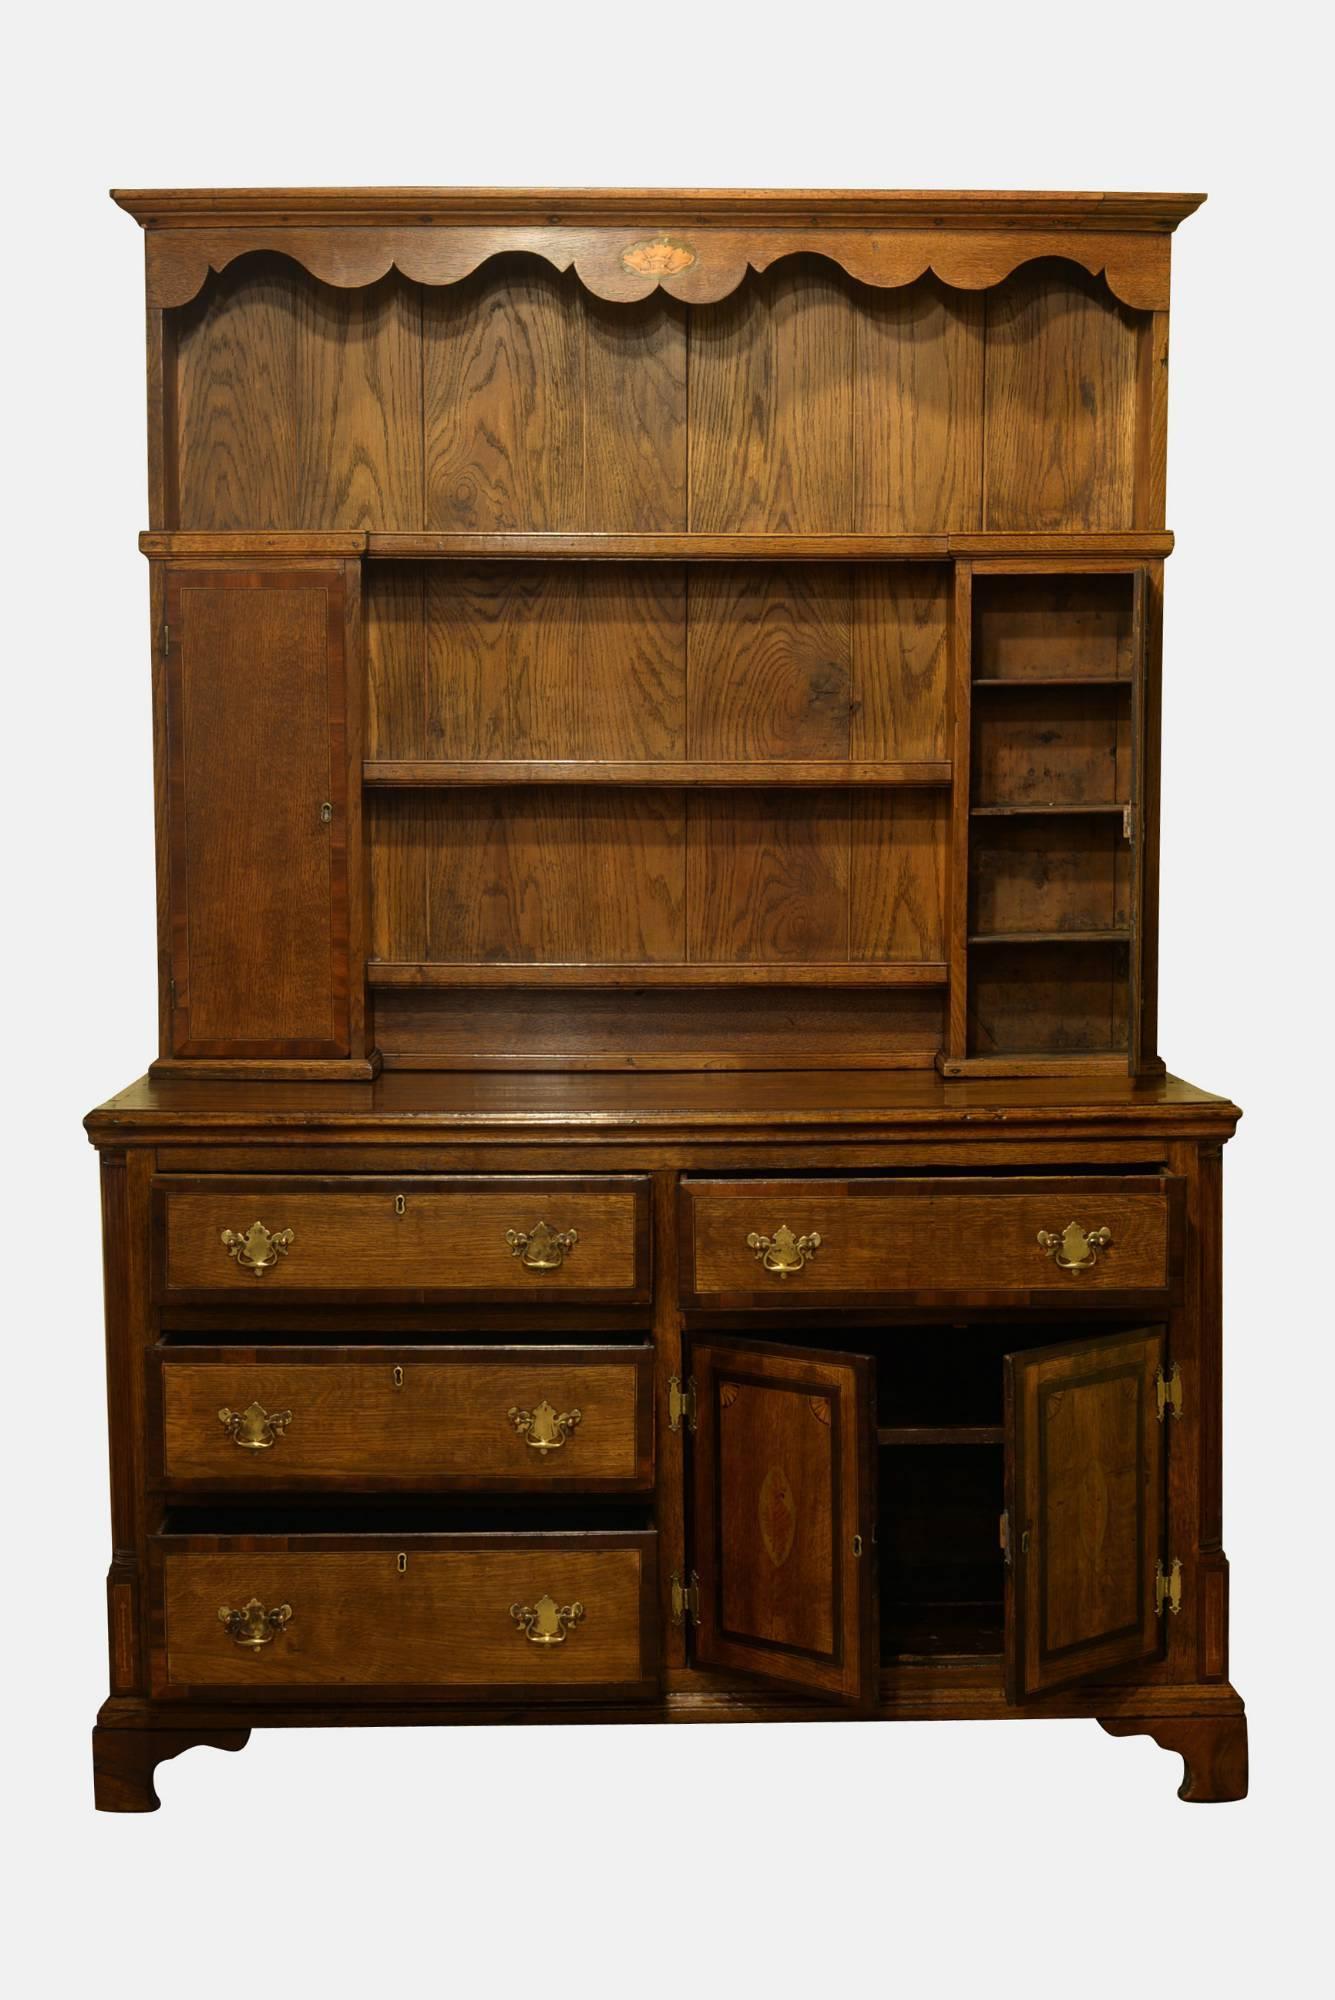 Early 19th century oak high dresser, the plate rack has a moulded cornice with central shell inlay above three open shelves flanked by two cupboard doors. The base with rectangular top above an arrangement of four drawers and two doors. The whole